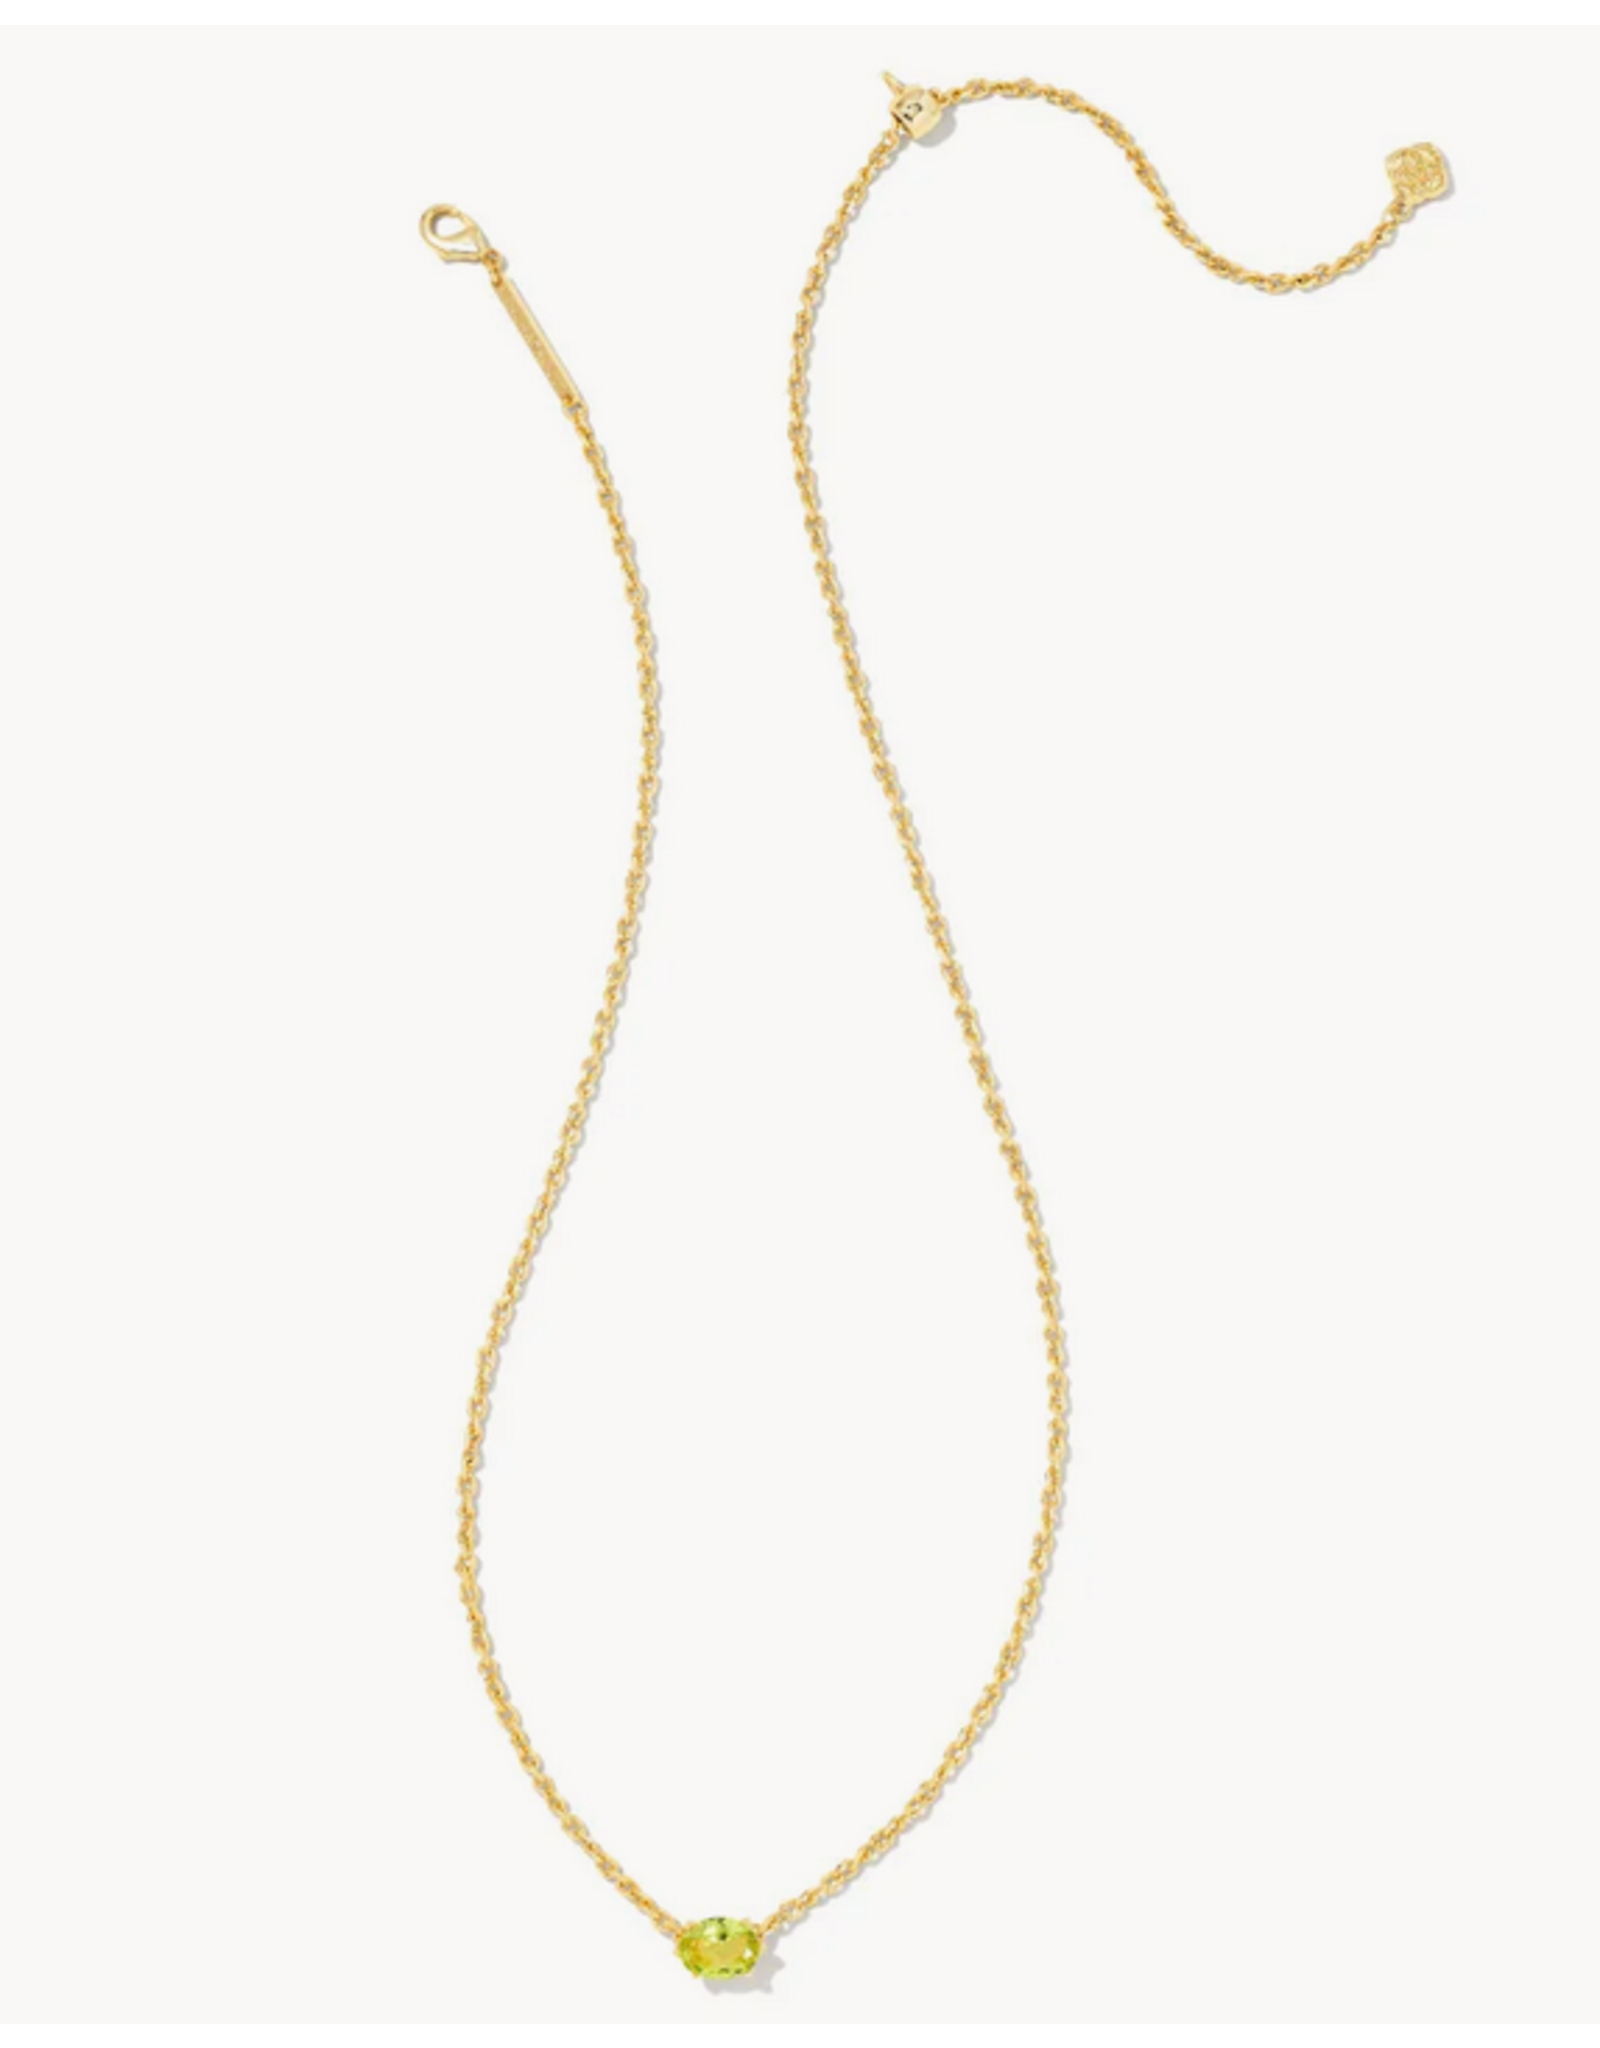 Kendra Scott Cailin Necklace Peridot Crystal on Gold (AUG.)